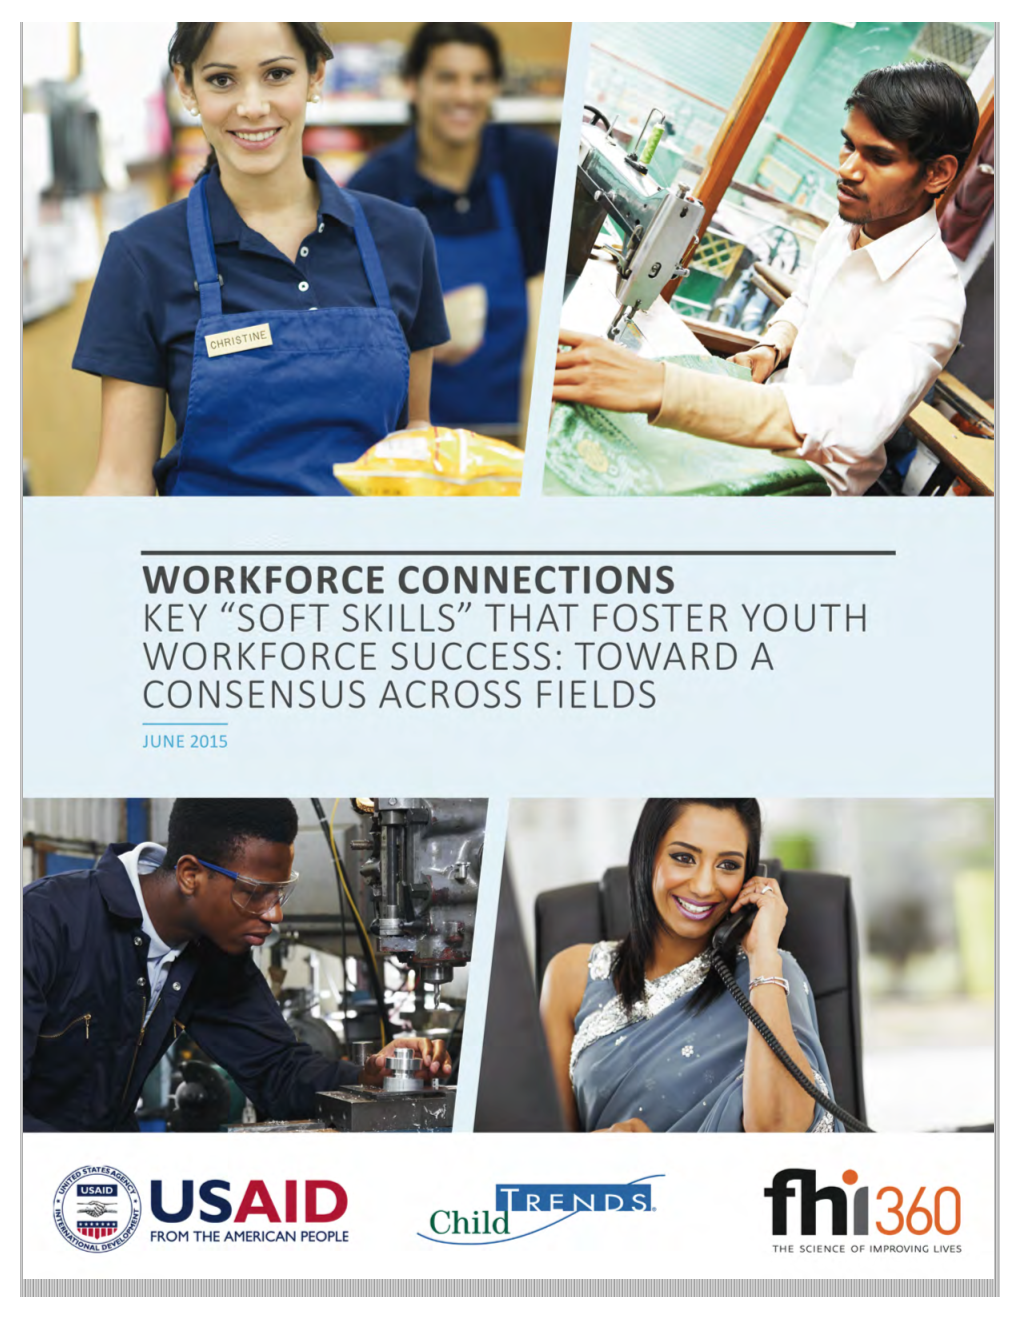 Soft Skills” That Foster Youth 1 Workforce Success: Toward a Consensus Across Fields